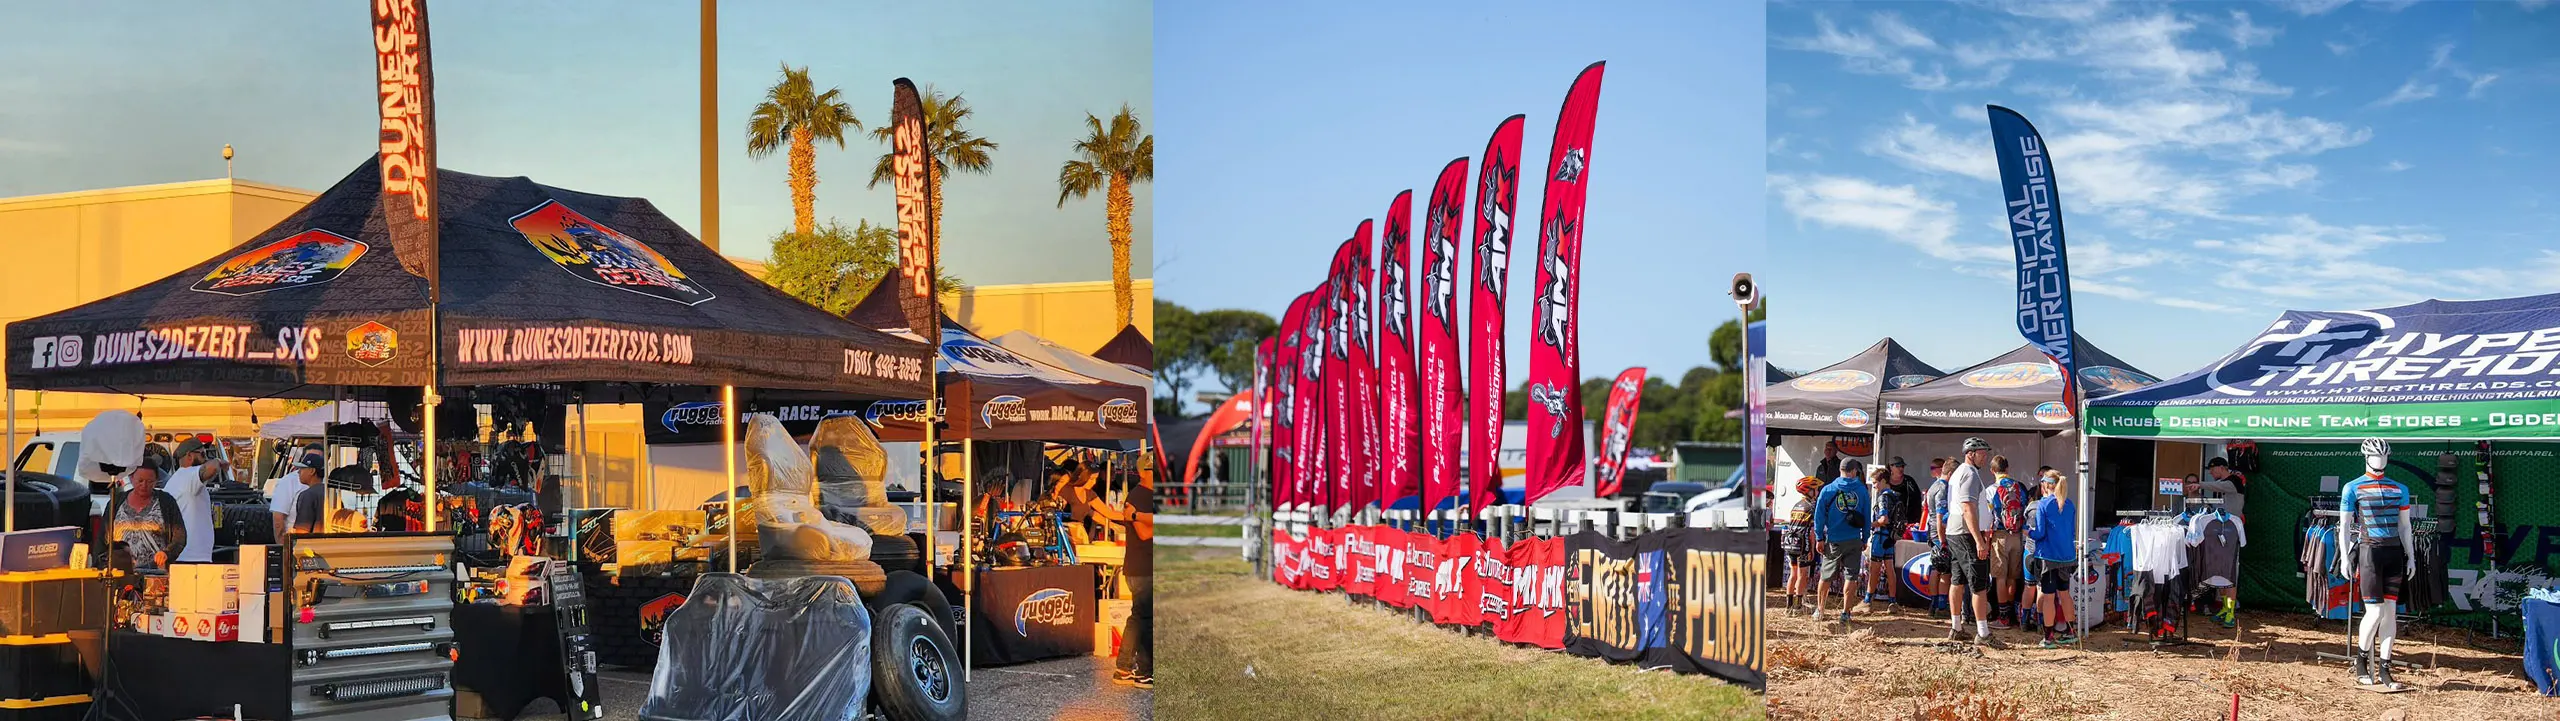 ASAP CANOPY is a company that specializes in custom tents, canopies, and promotional event structures.